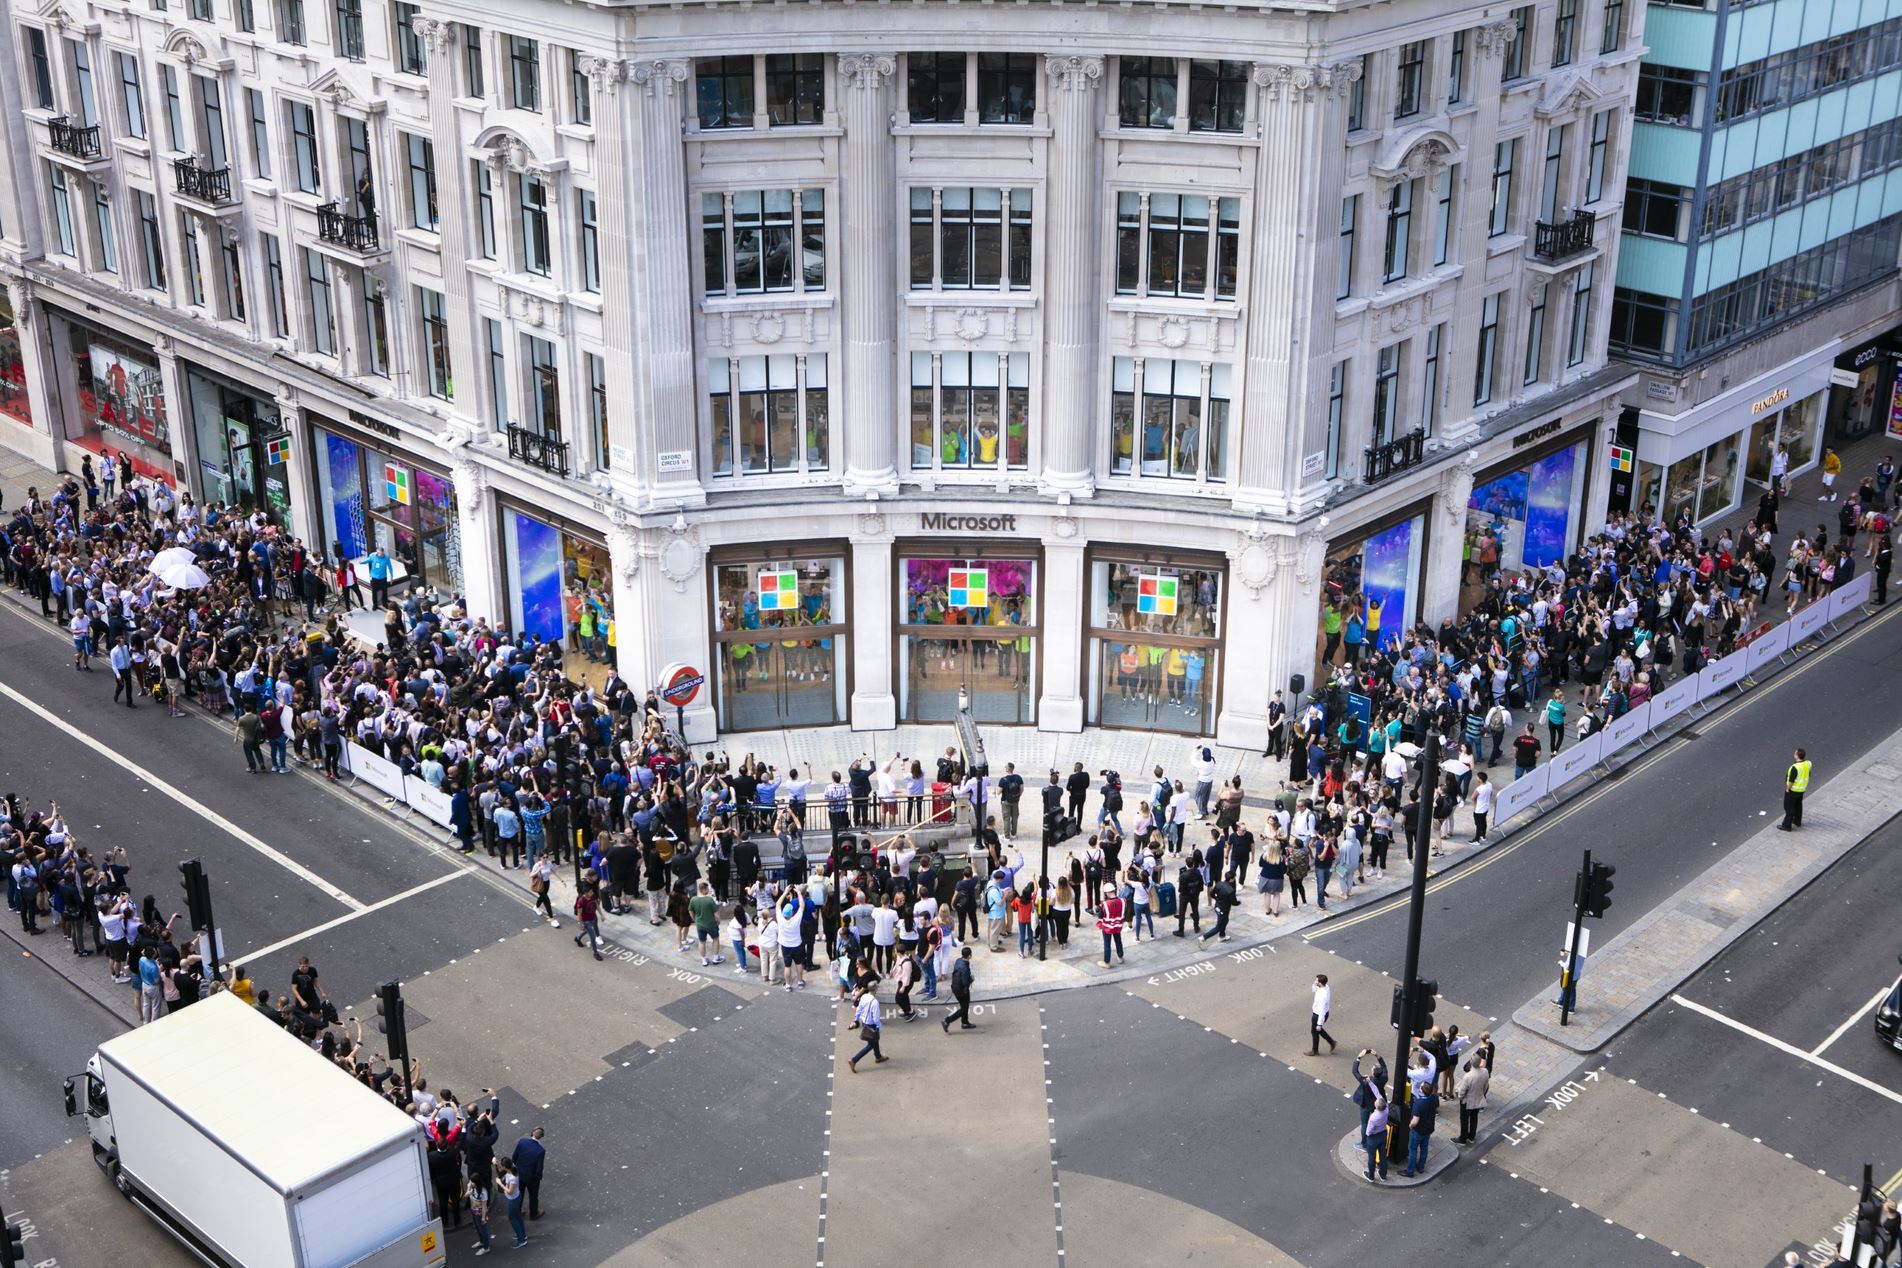 Microsoft Oford Circus Flagship Store <br>
Photograph courtesy of Microsoft